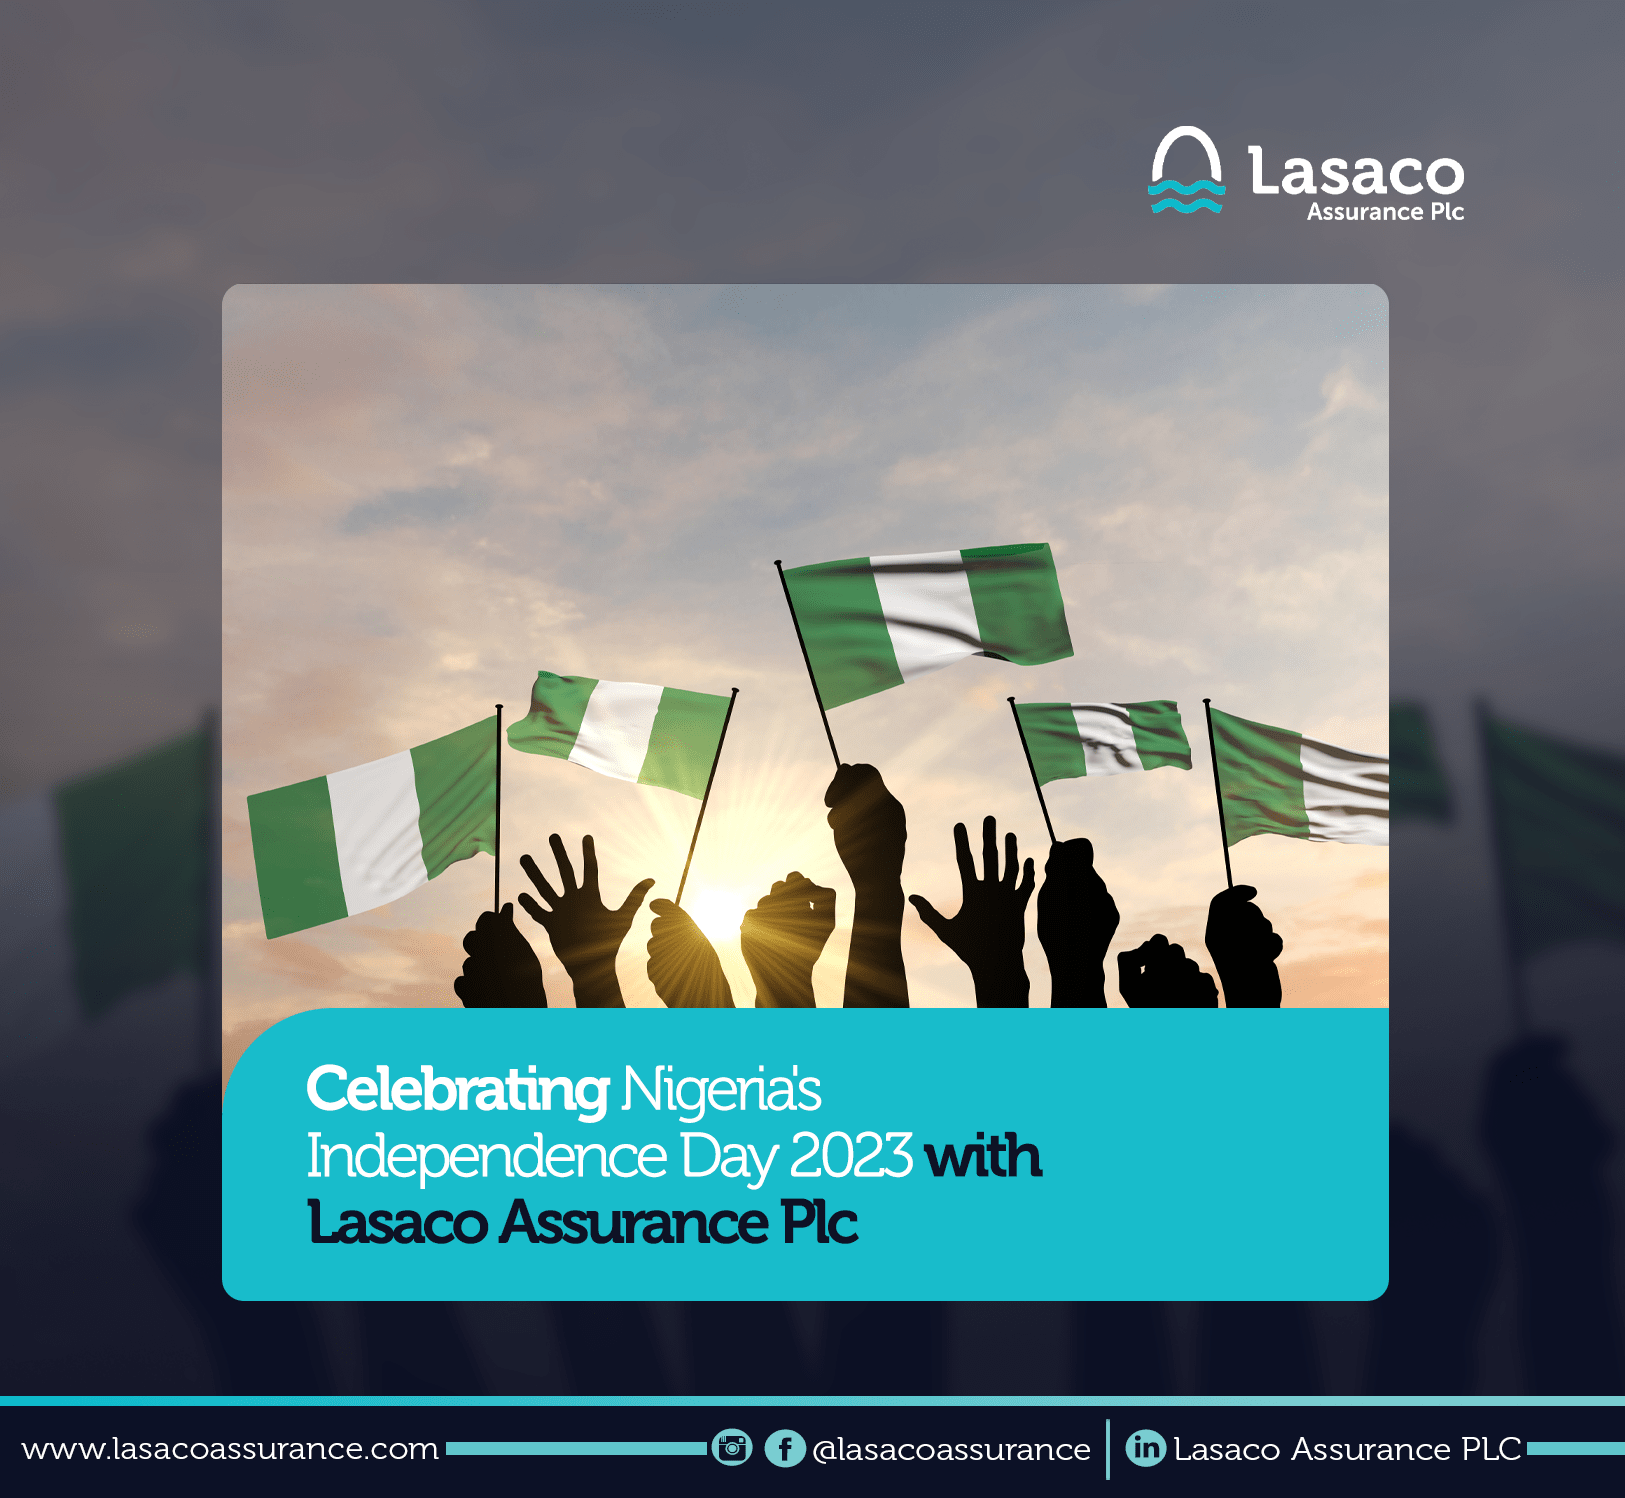 Celebrating Nigeria’s Independence Day 2023 with Lasaco Assurance Plc